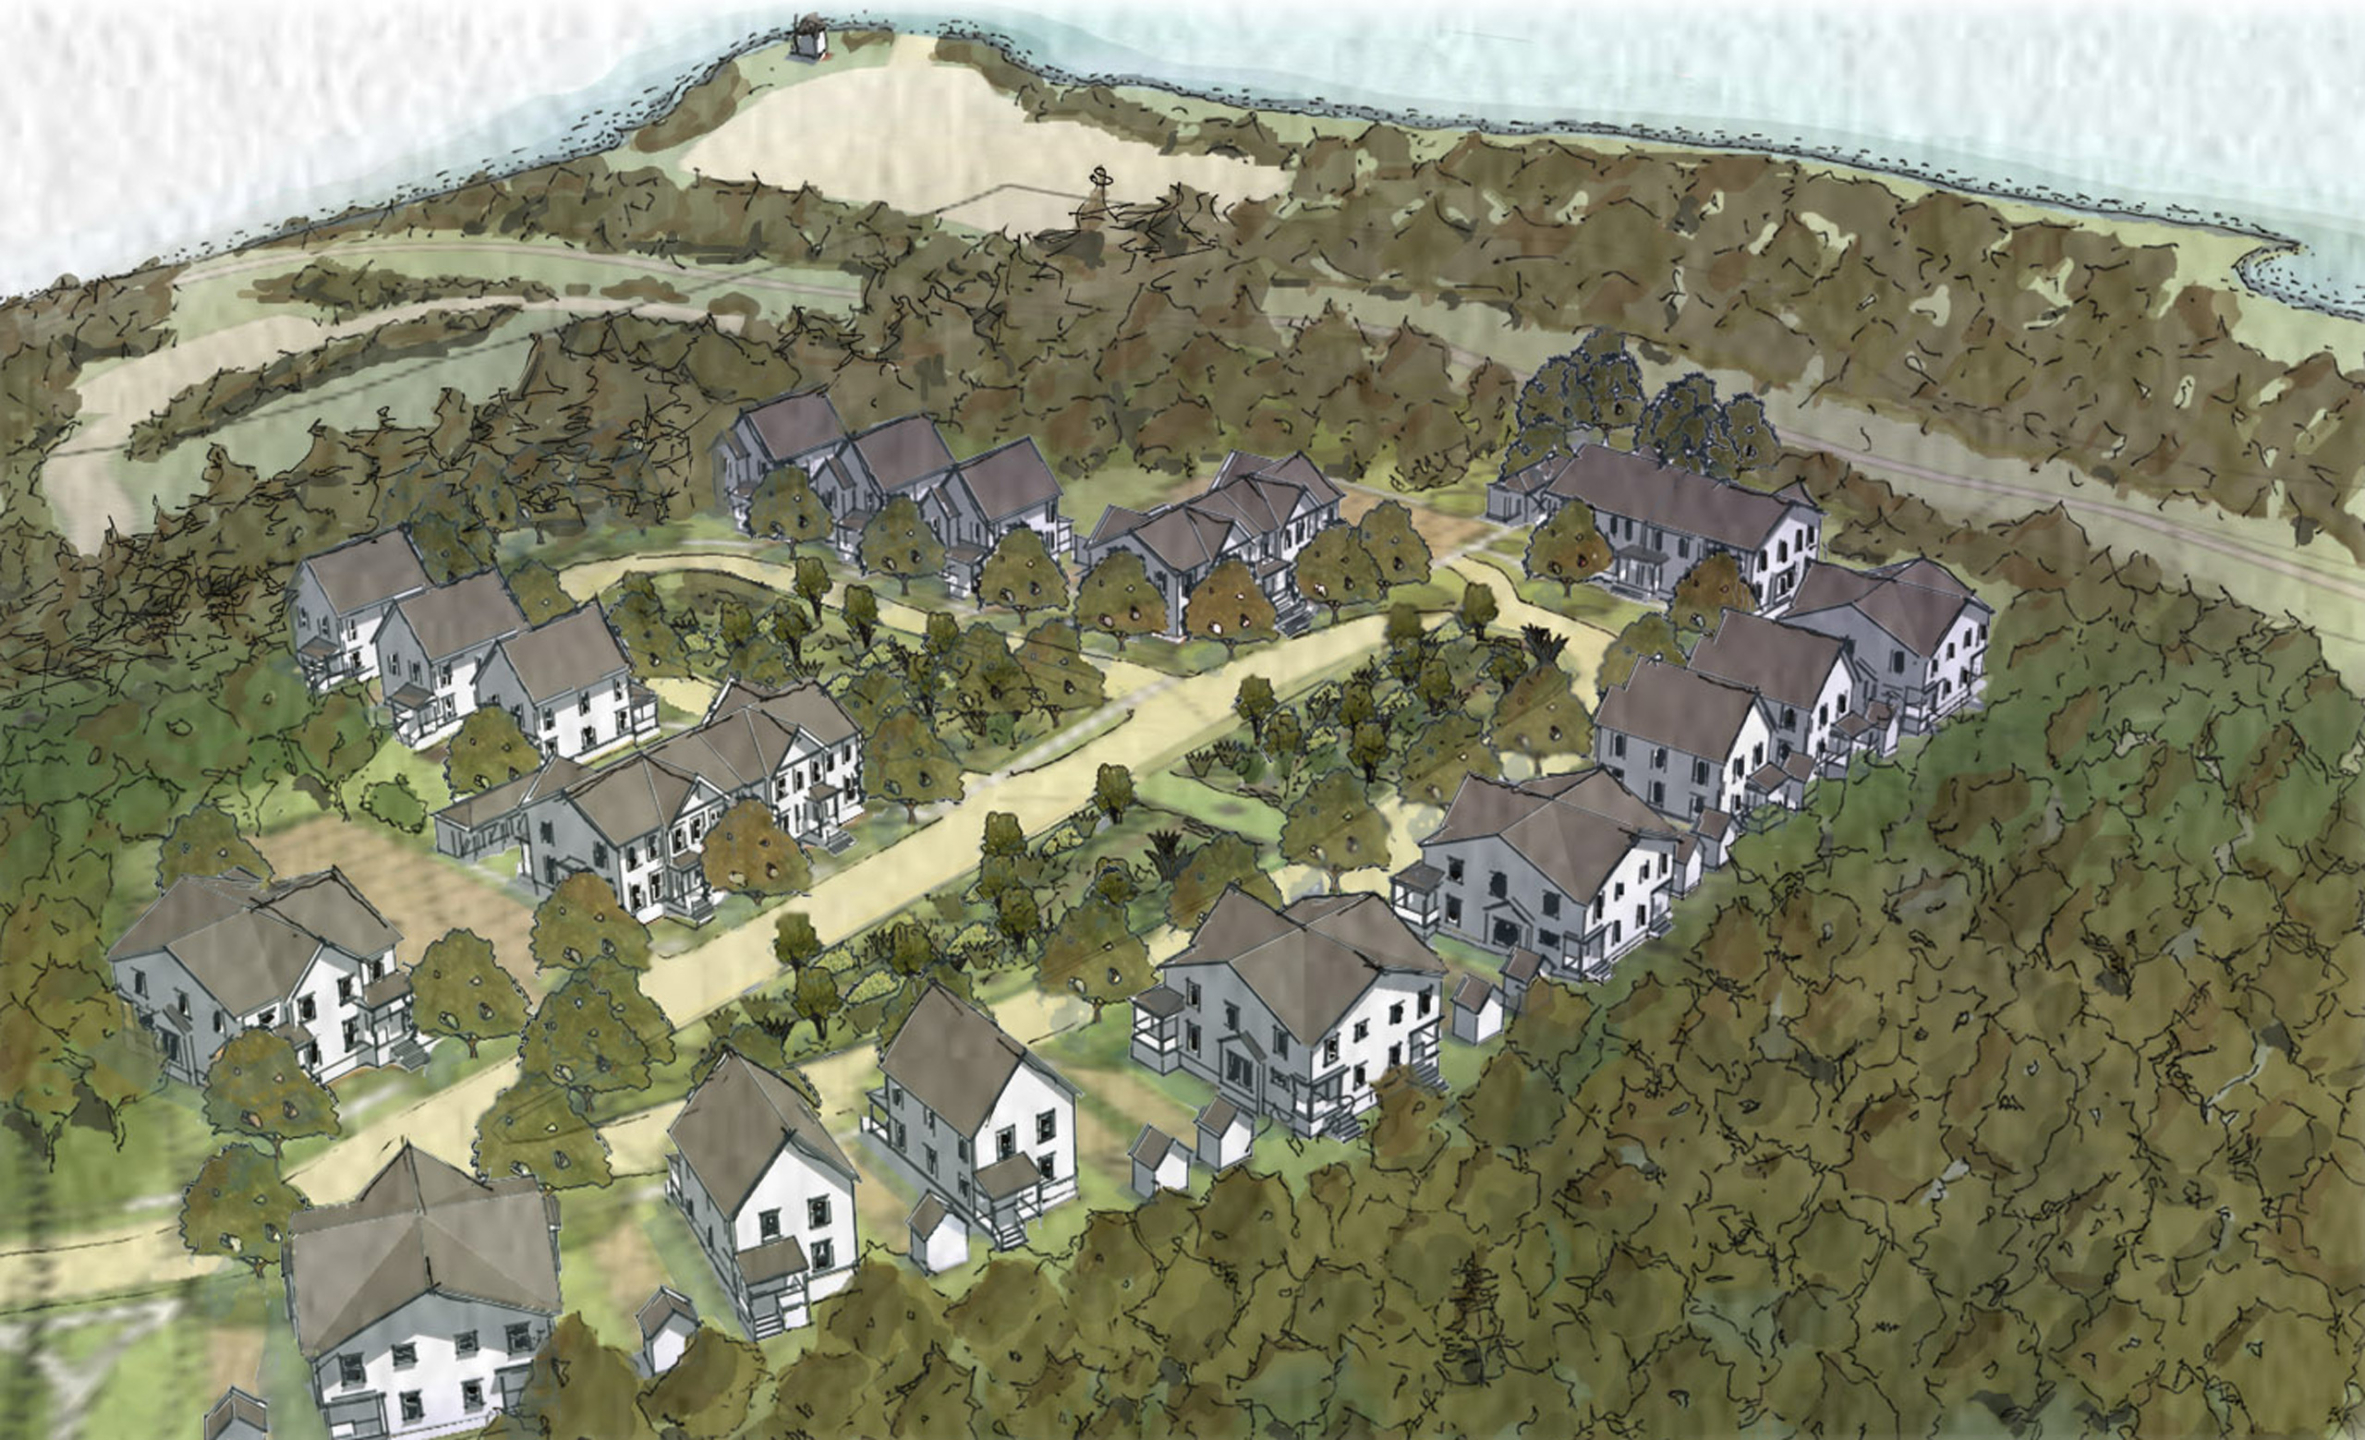 Aerial perspective drawing of the community with water in distance